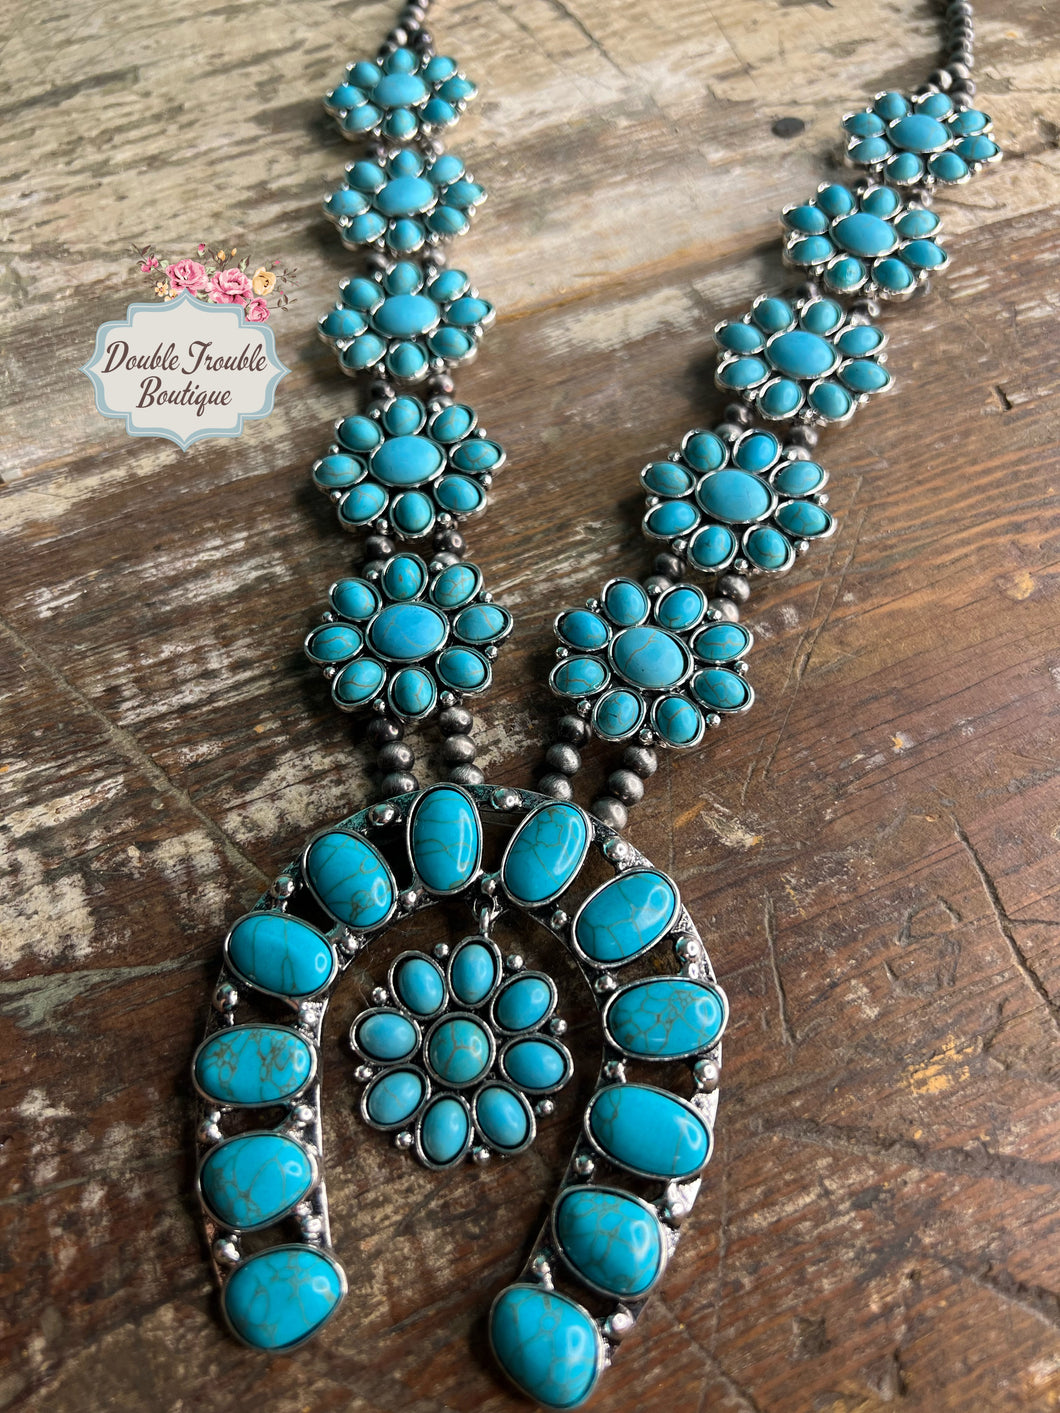 First Lady Squash Blossom Necklace